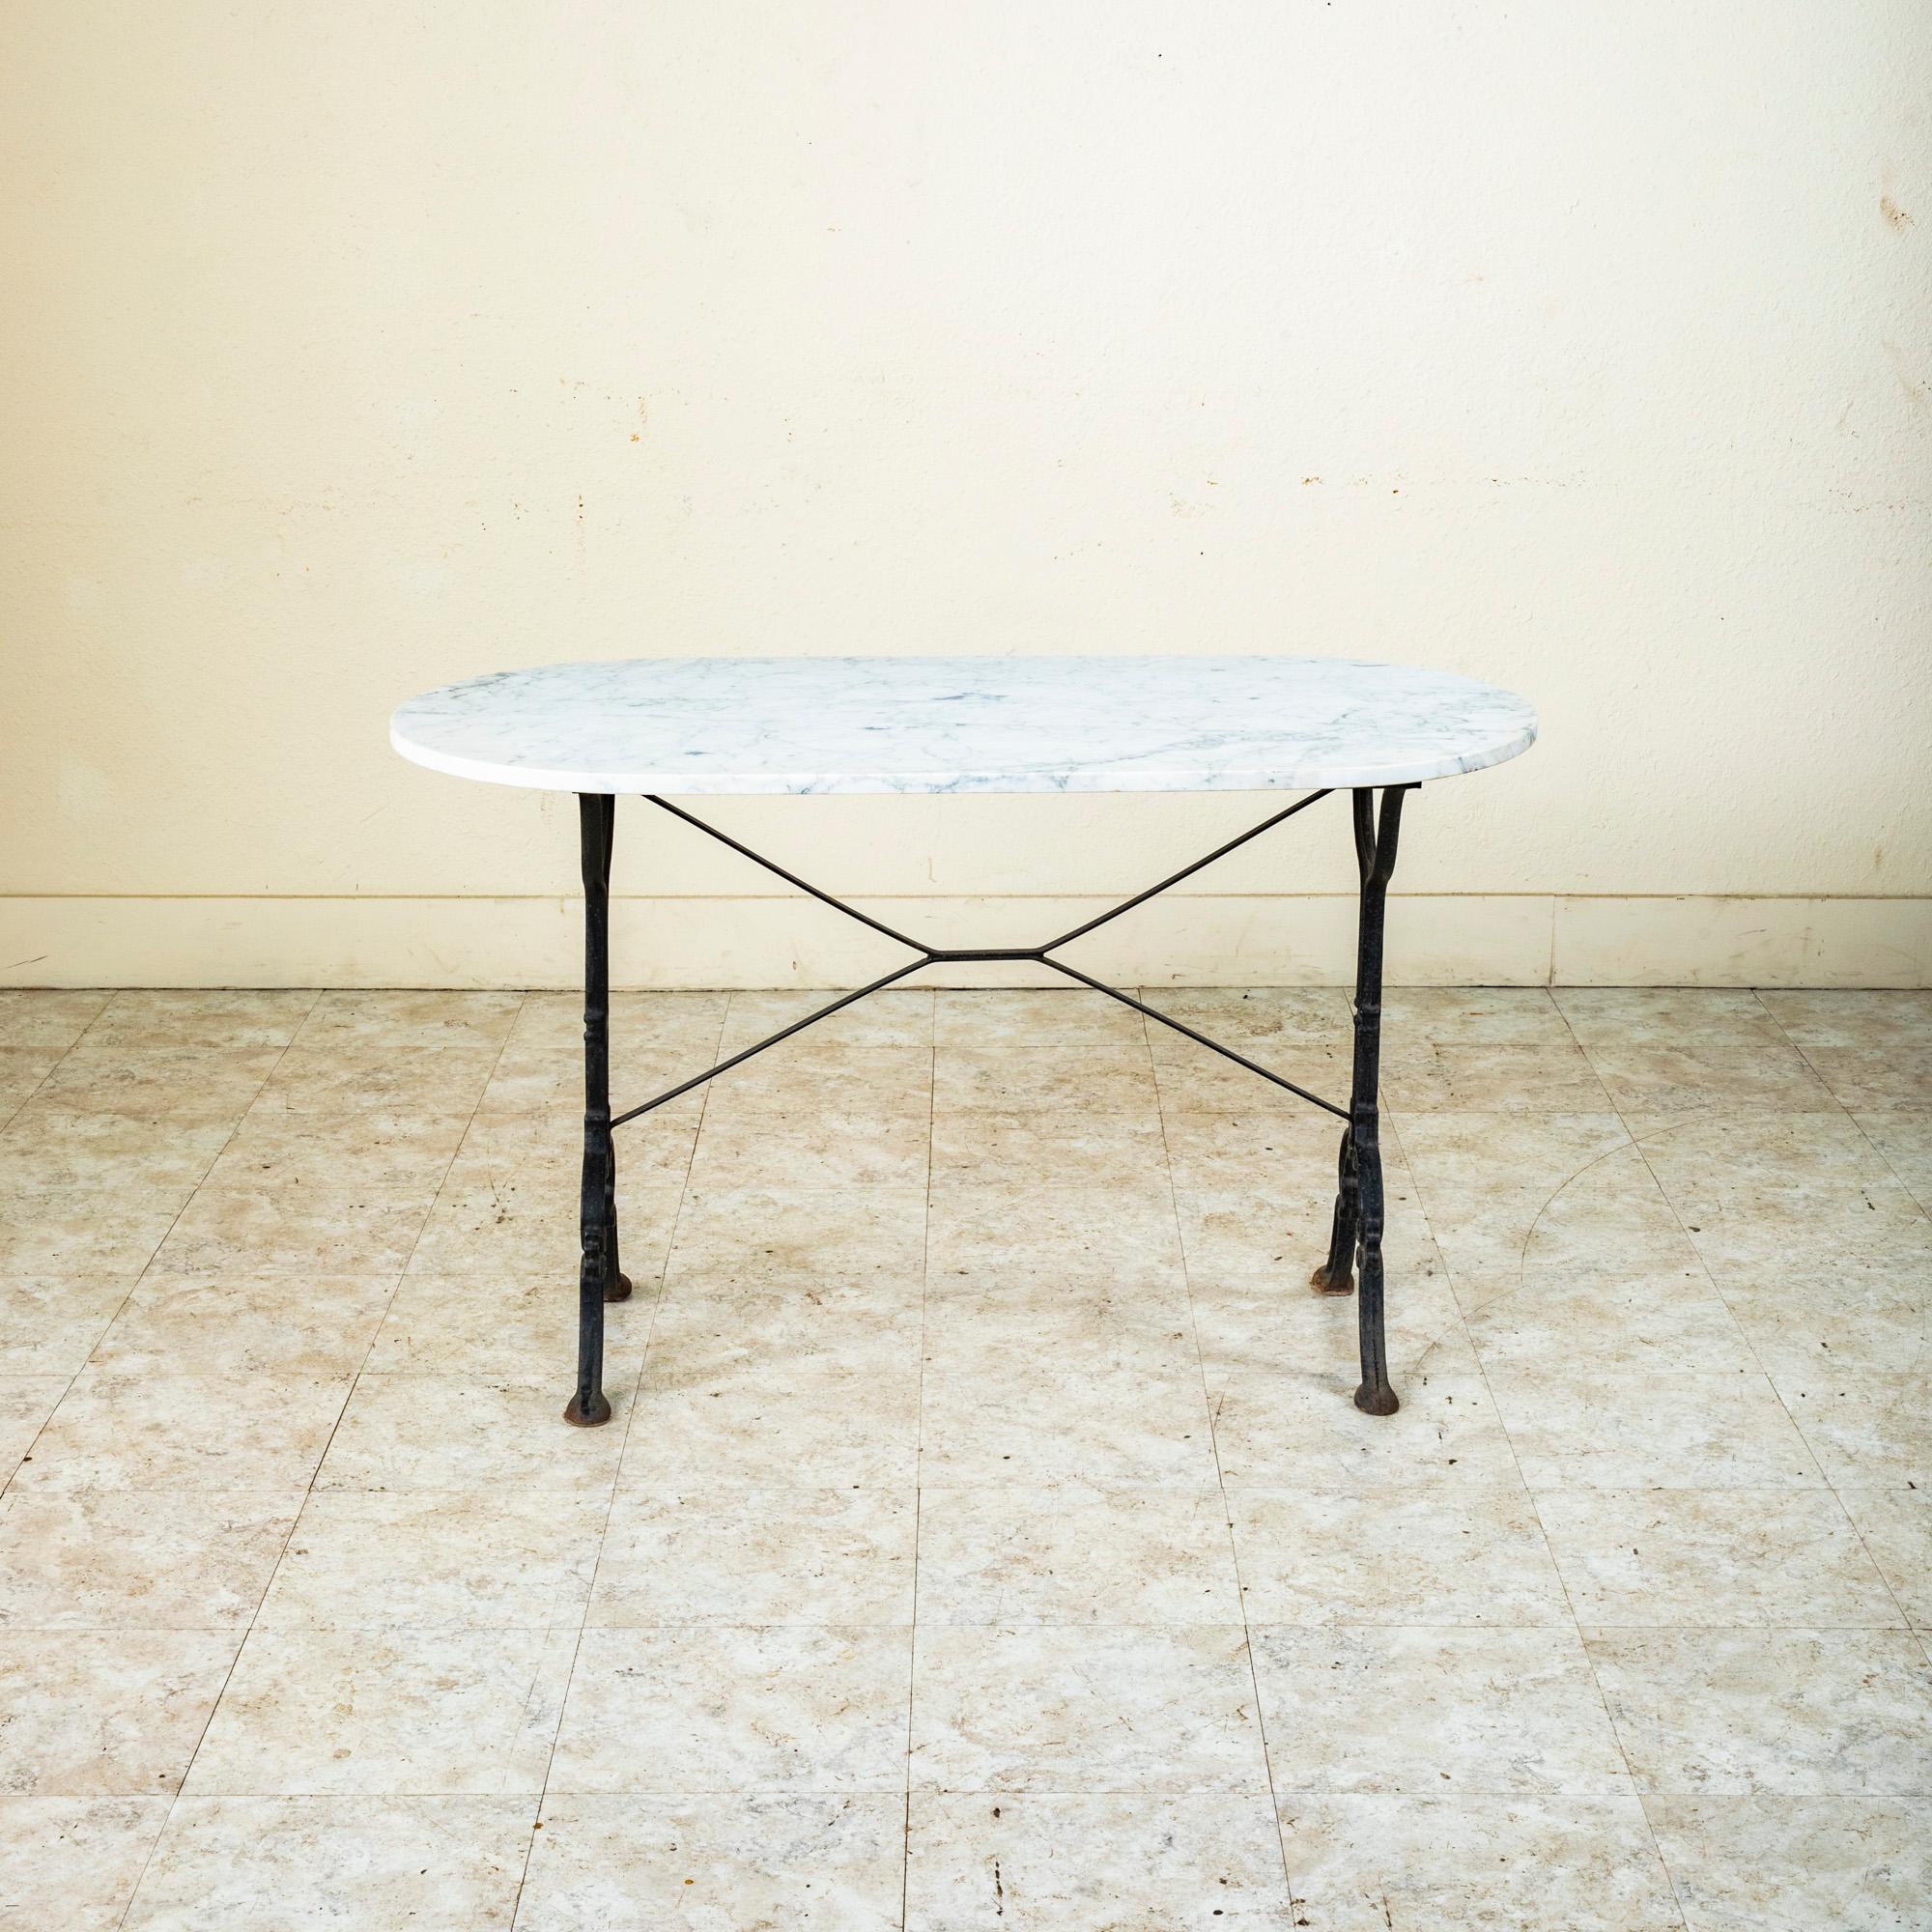 Originally used in a French brasserie in the Mid-20th Century, this cast iron bistro table or cafe table features a solid white marble top. Scrolled iron legs support the top and are joined by an X-stretcher that provides additional stability to the